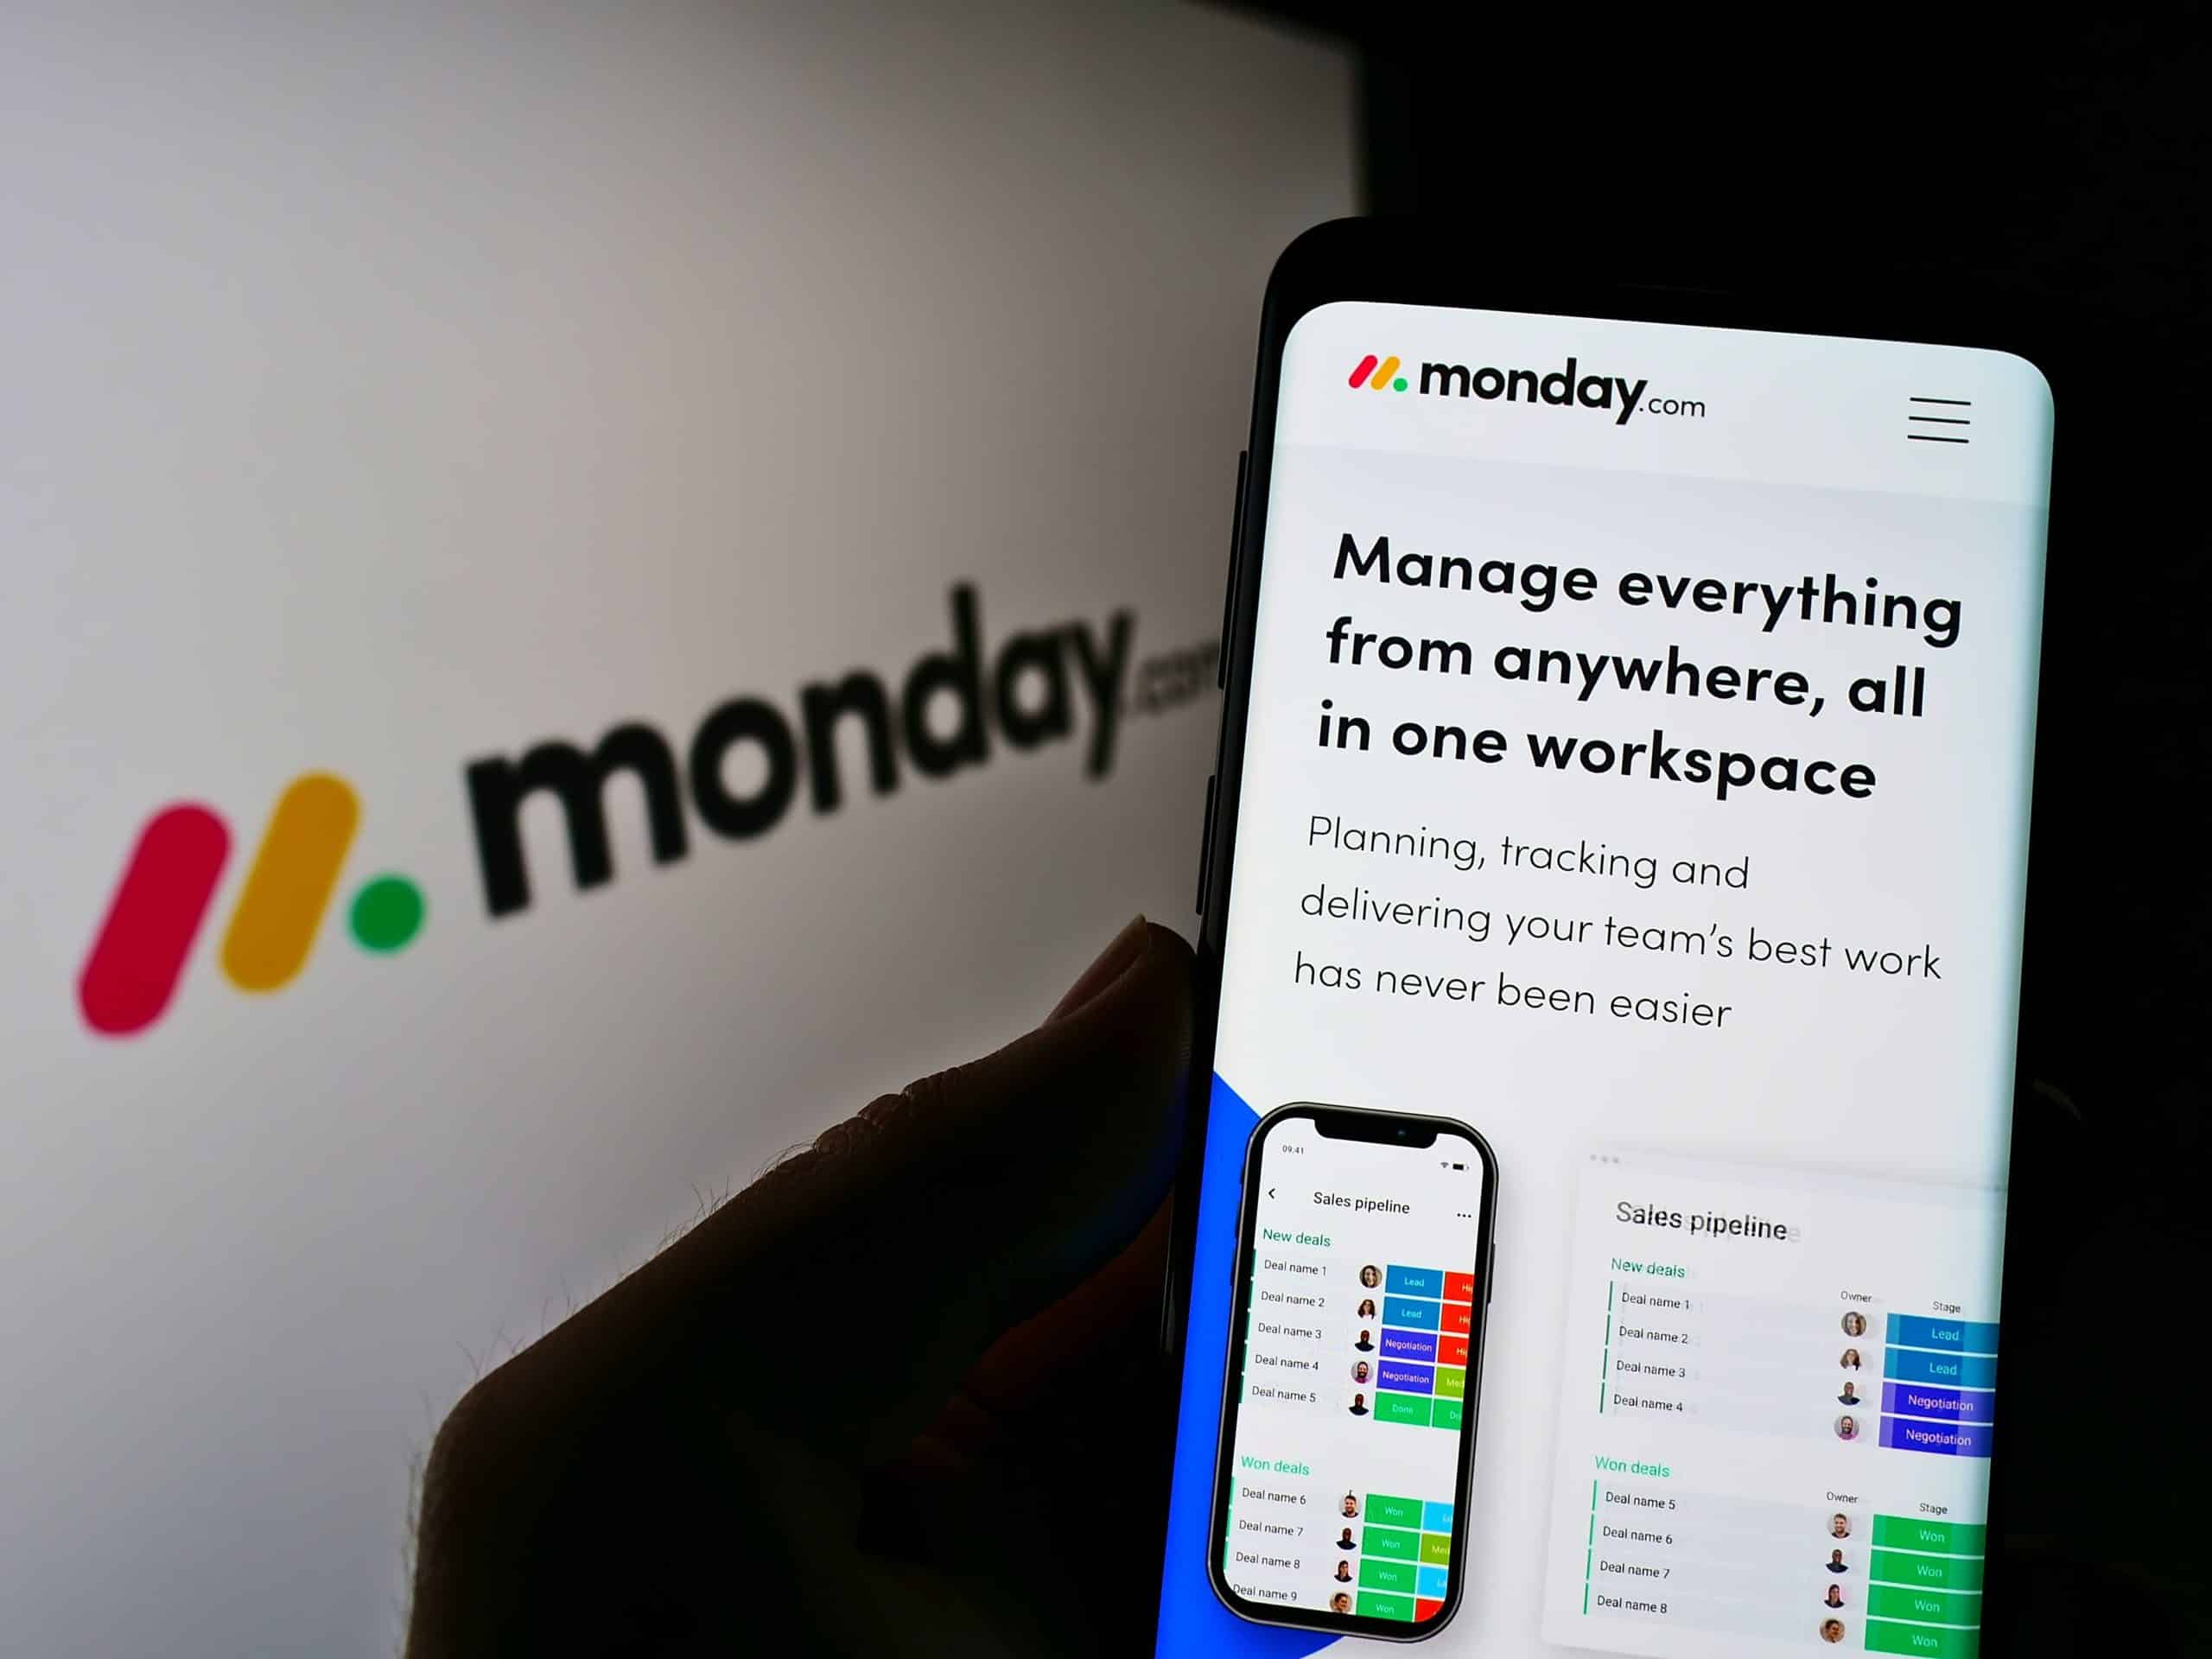 Monday is a project management platform that is especially designed for growing businesses.